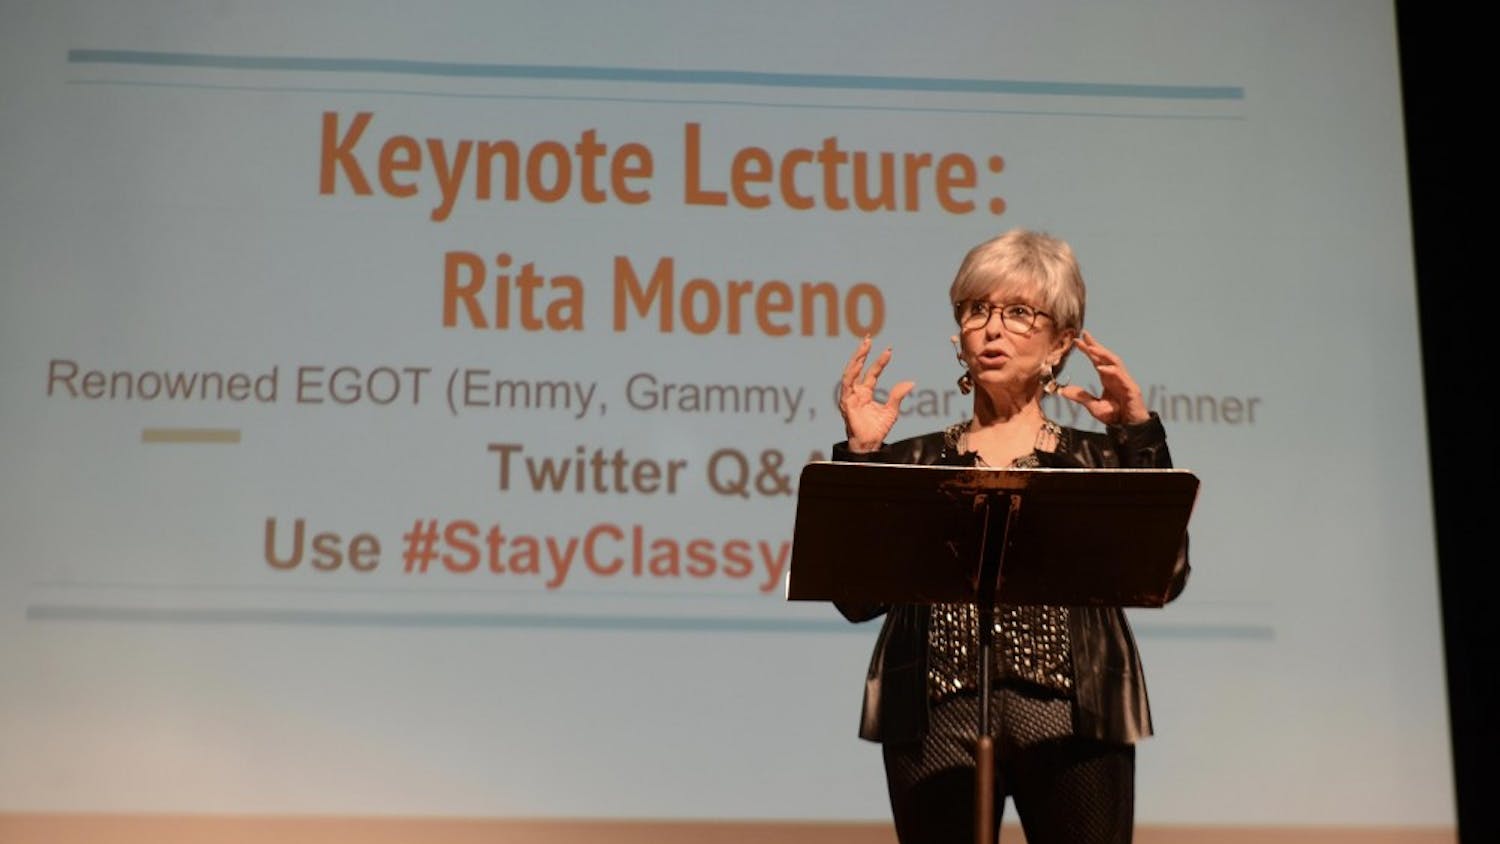 Rita Moreno talks about her experience immigrating to the United States.